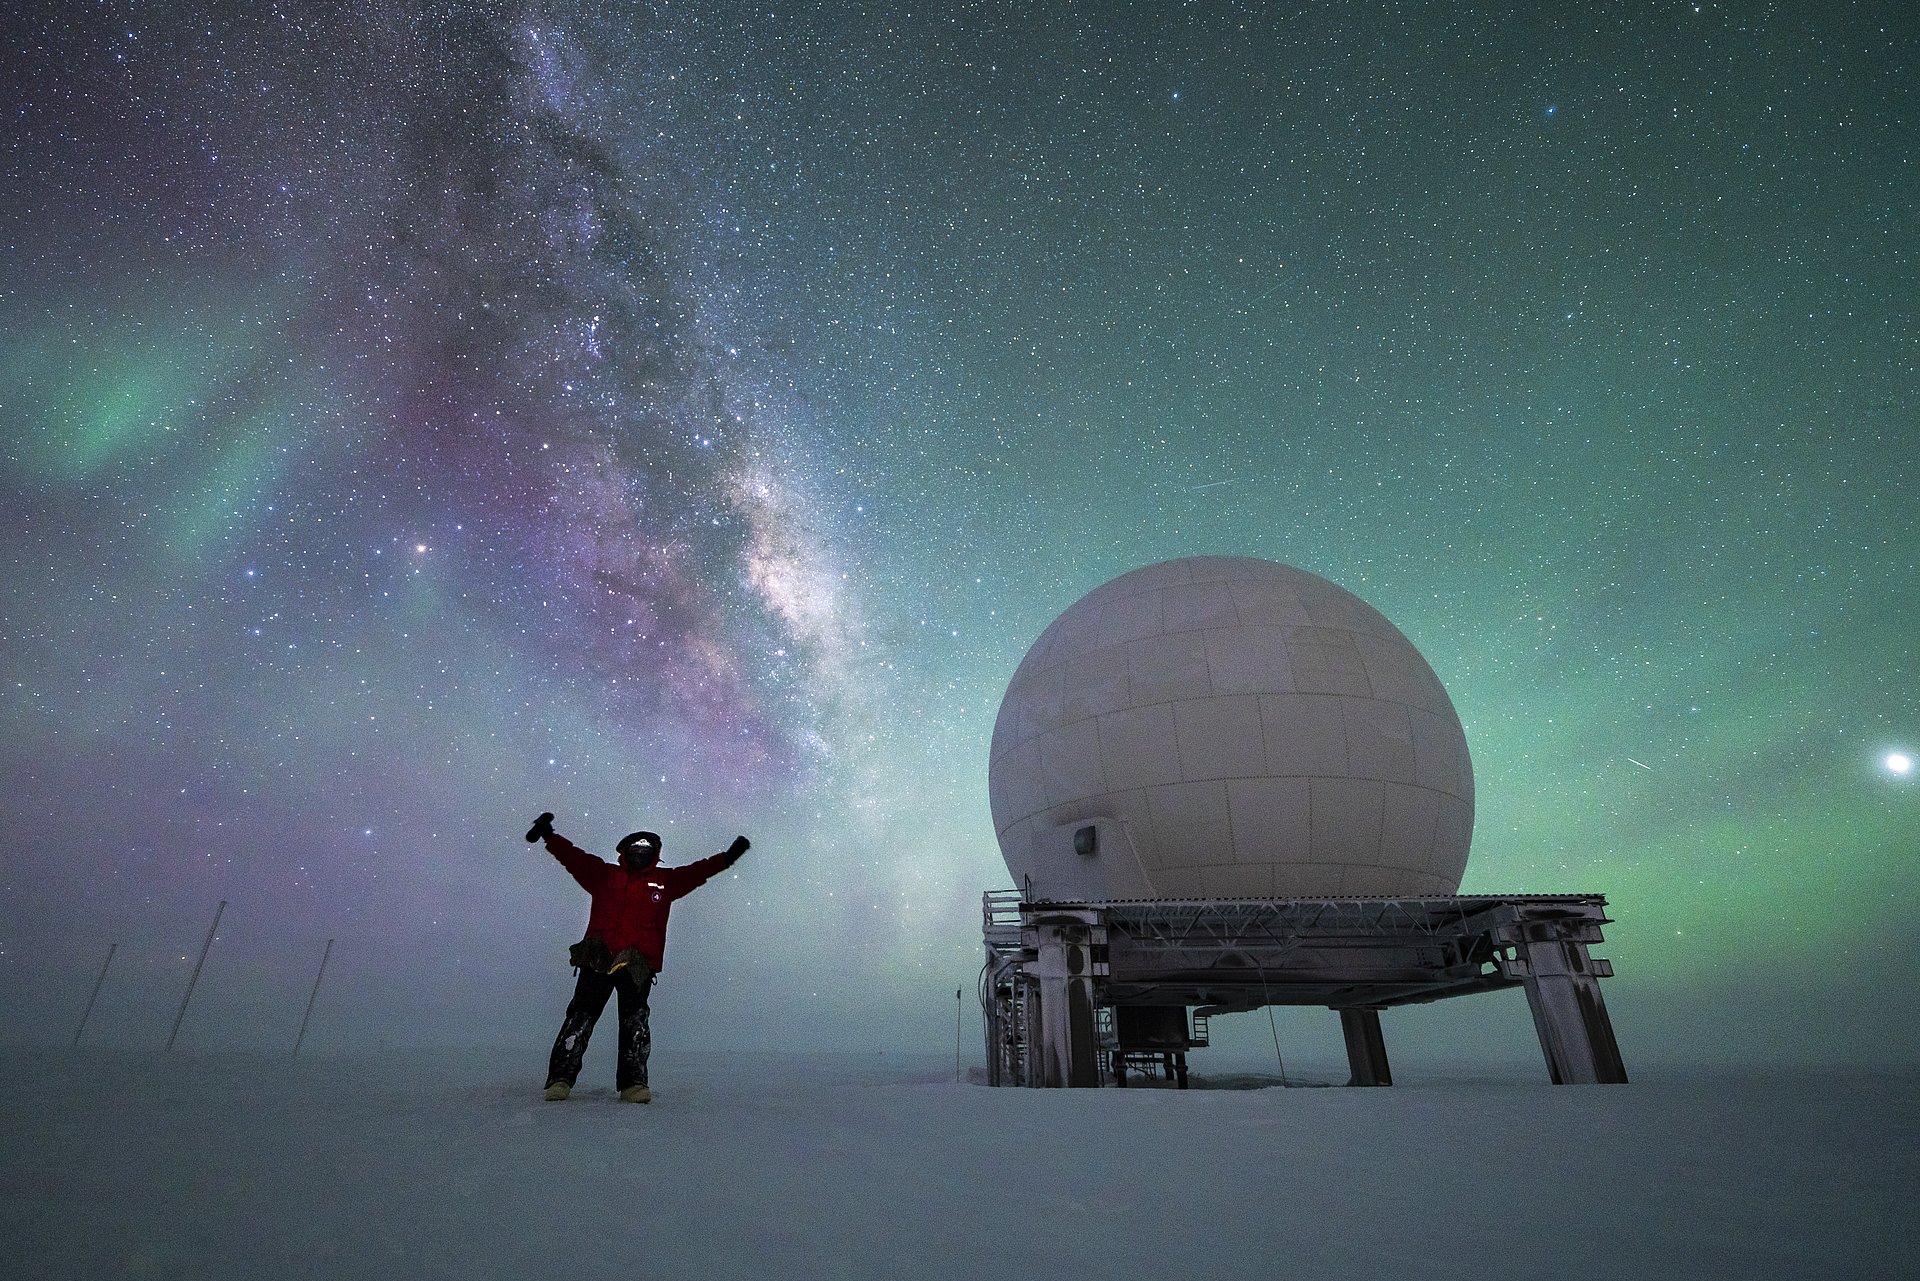 The Milky Way and auroras at the South Pole. 